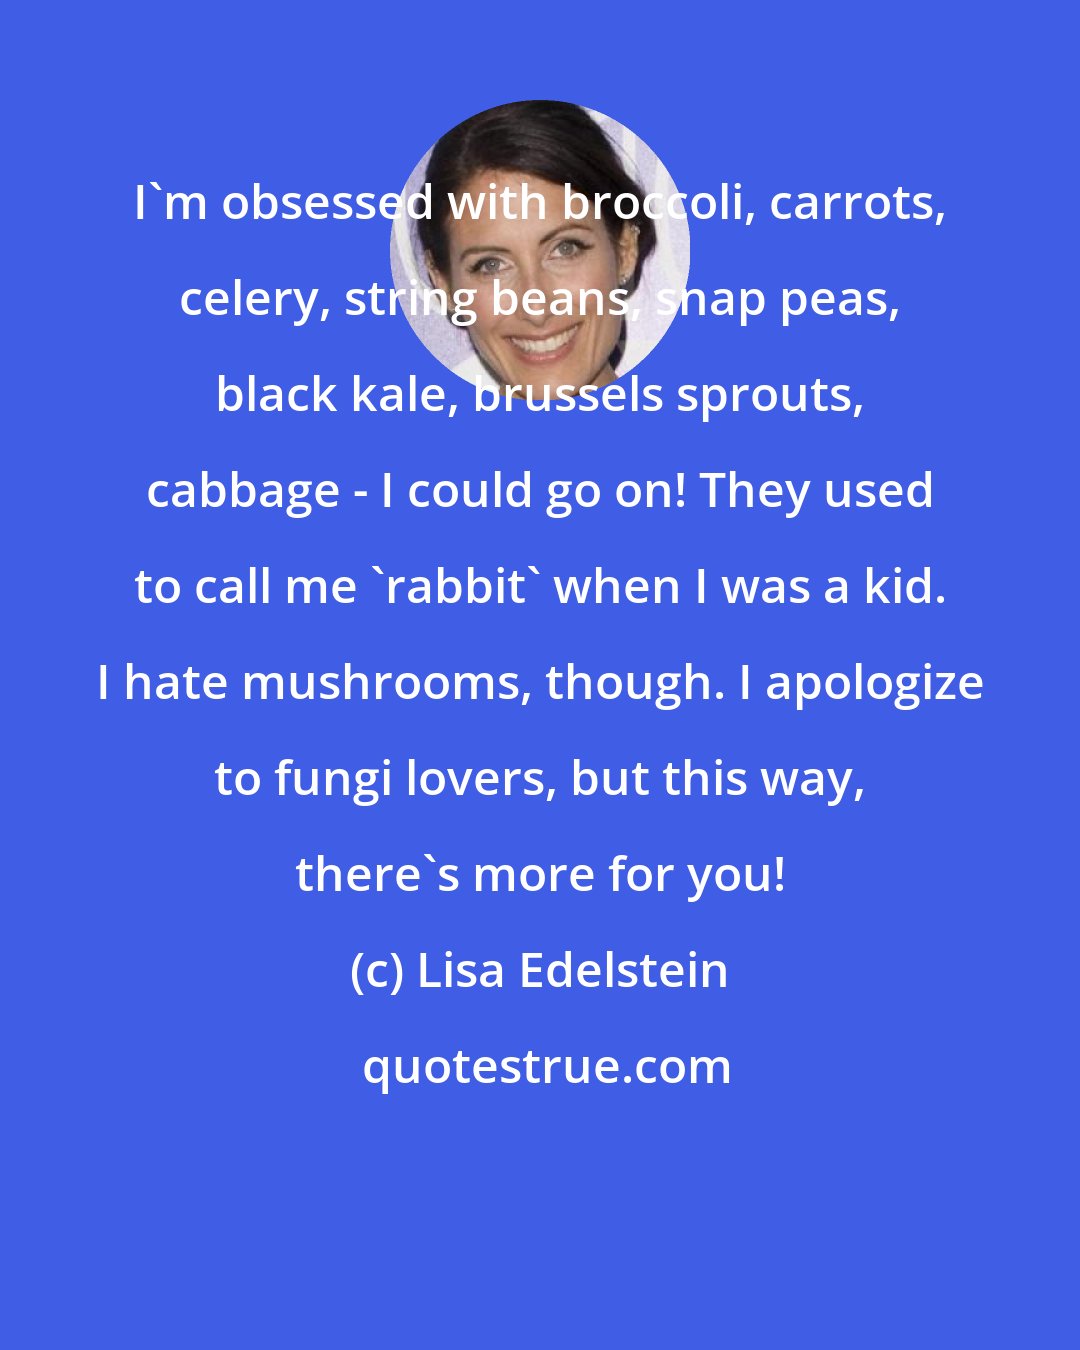 Lisa Edelstein: I'm obsessed with broccoli, carrots, celery, string beans, snap peas, black kale, brussels sprouts, cabbage - I could go on! They used to call me 'rabbit' when I was a kid. I hate mushrooms, though. I apologize to fungi lovers, but this way, there's more for you!